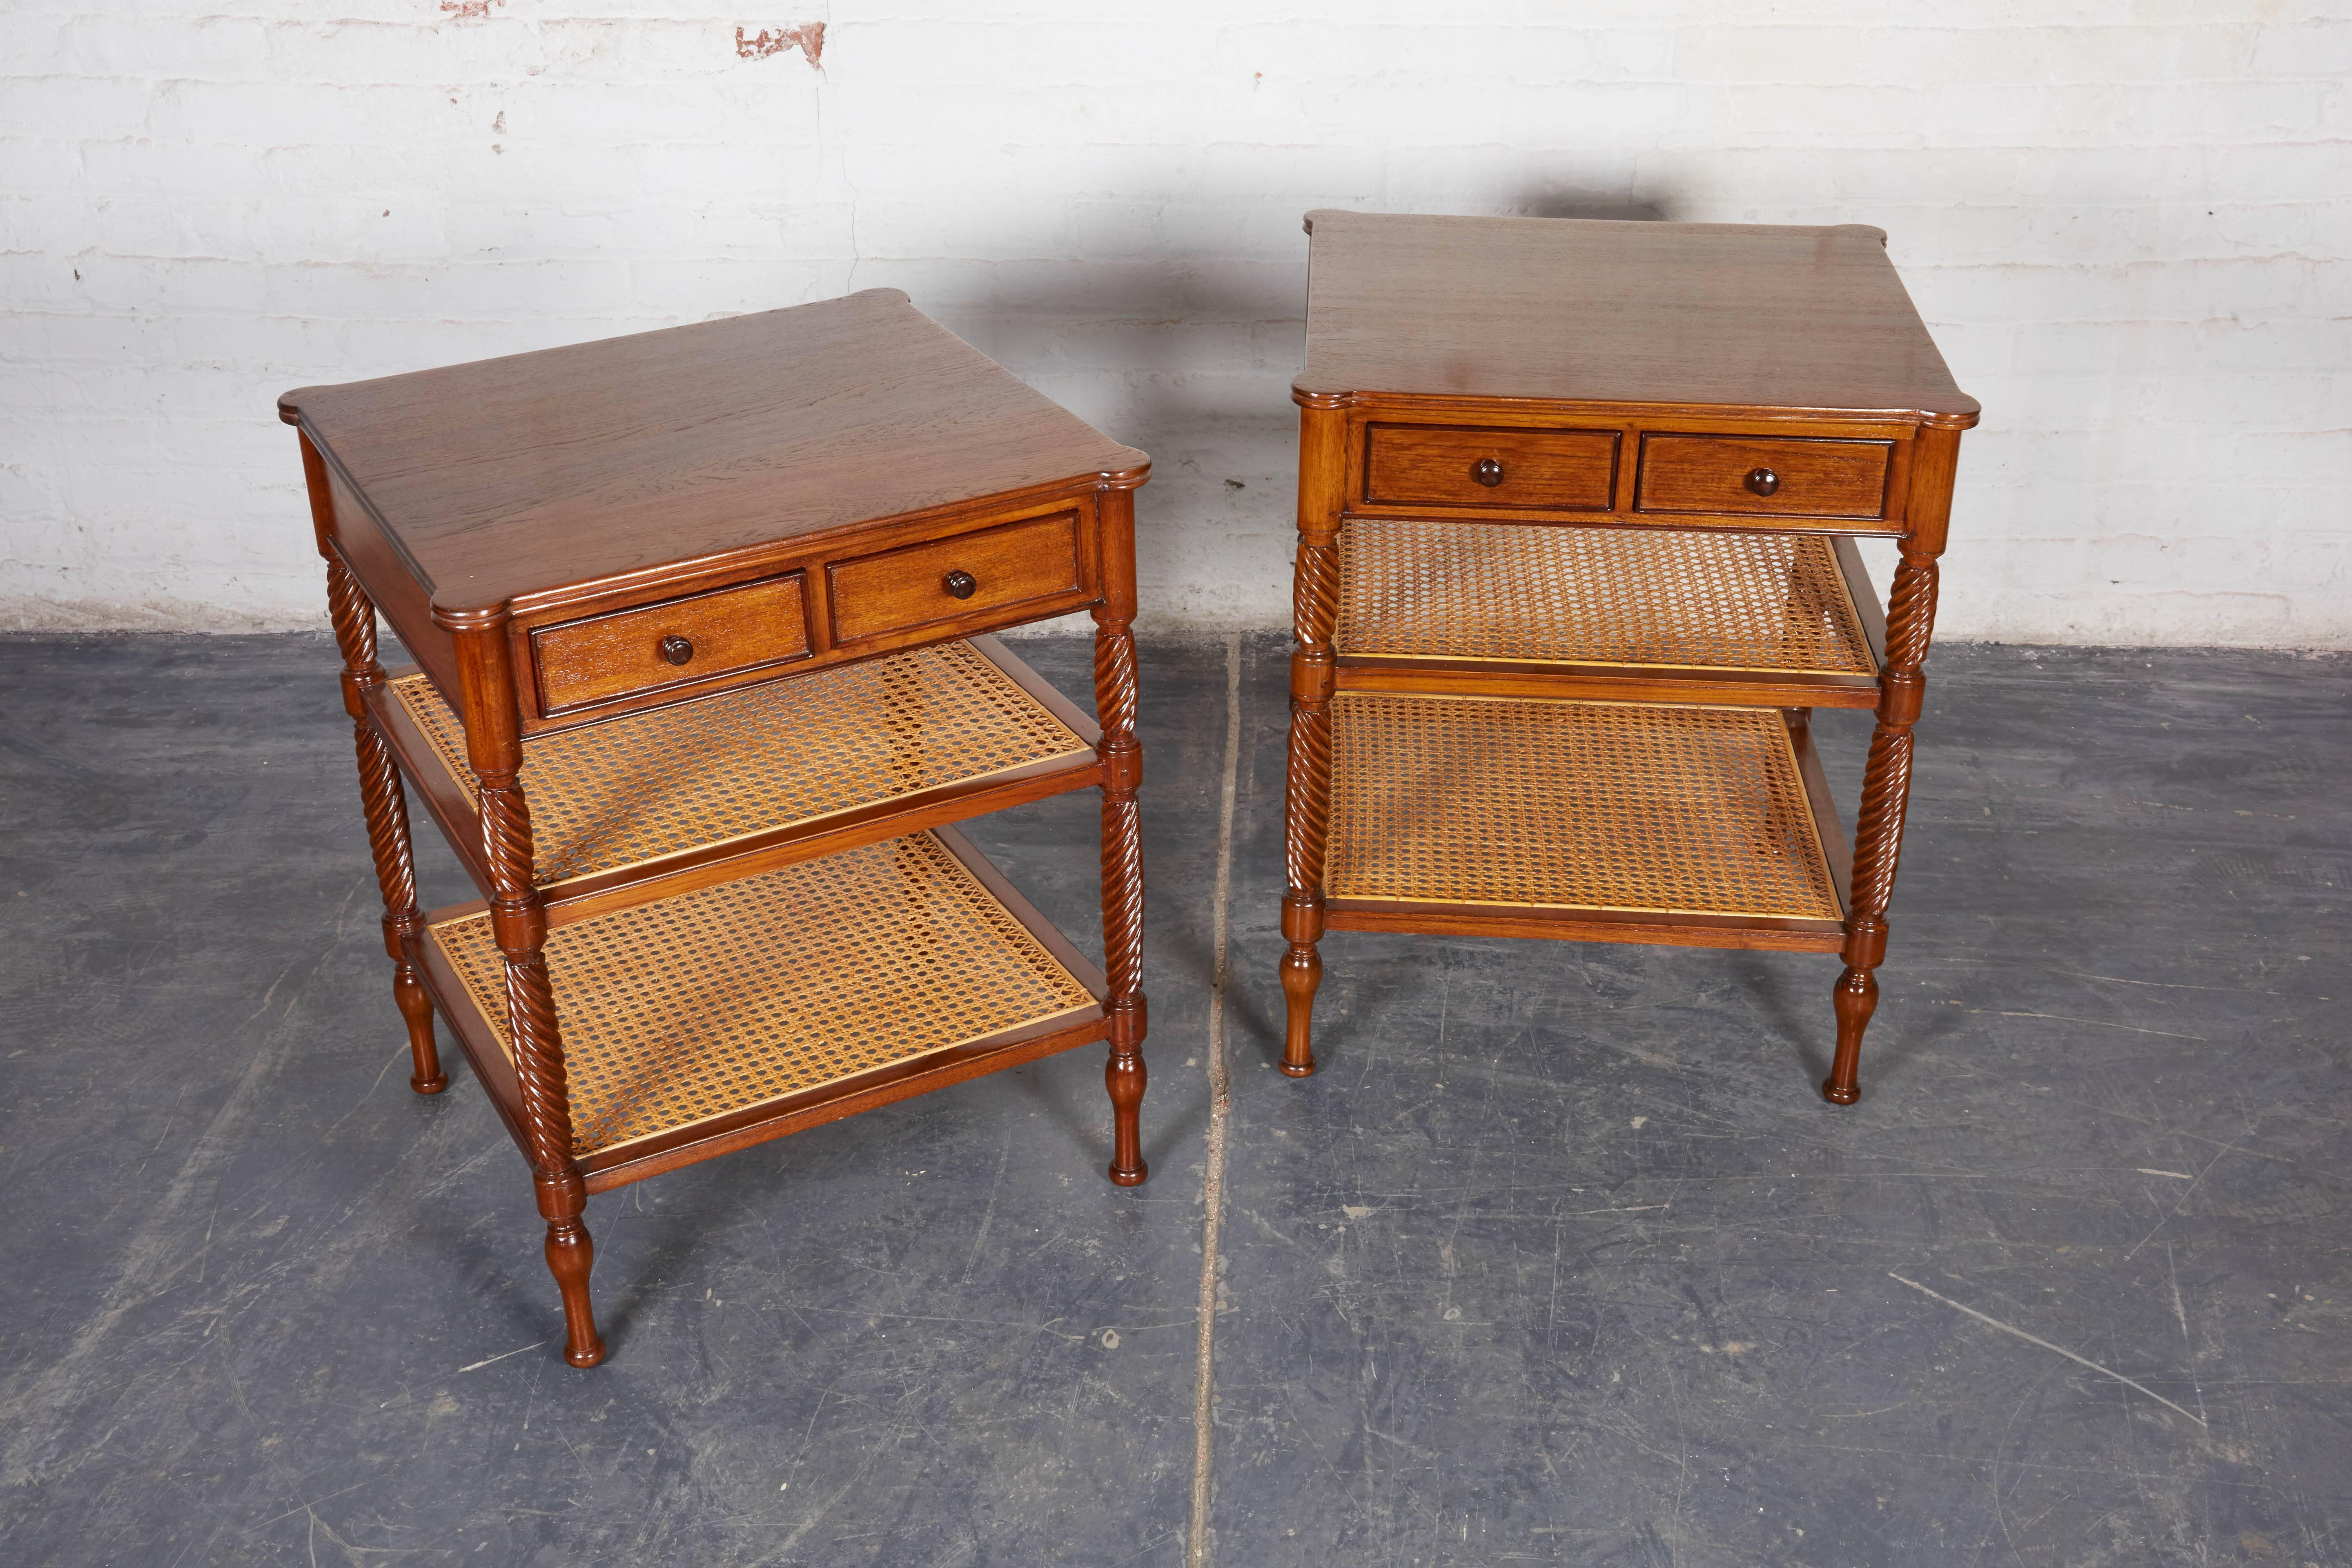 British Colonial Pair of Teak and Caned Etagere Side Tables